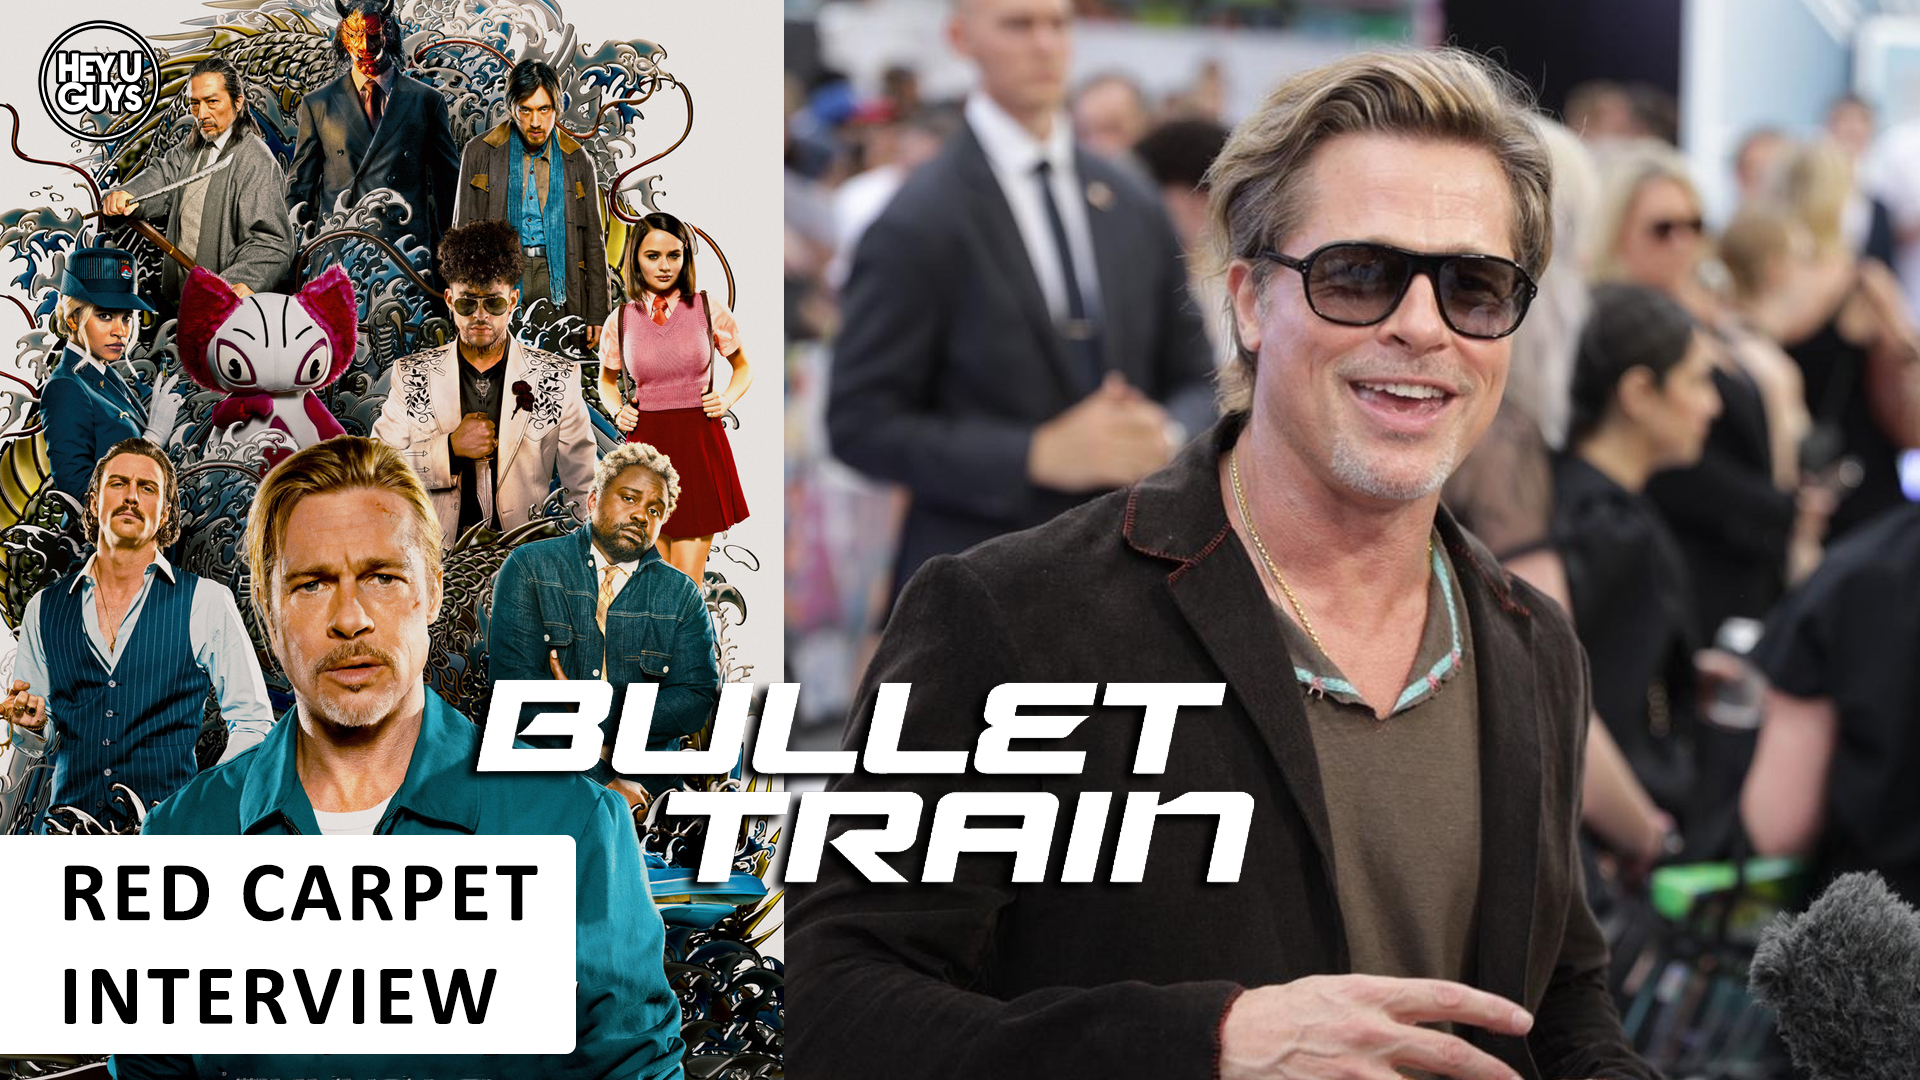 Forget about Brad Pitt in his latest movie; the bullet train is